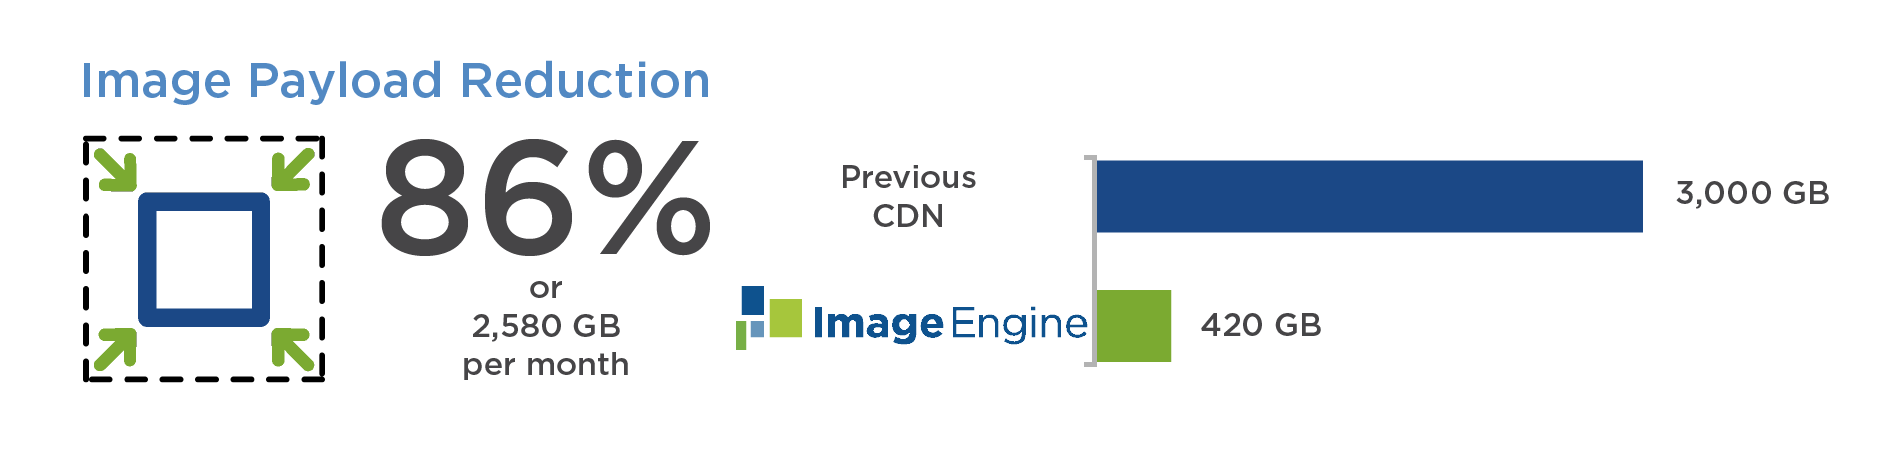 Furnspace accelerate web page by reducing image payload. ImageEngine Image CDN